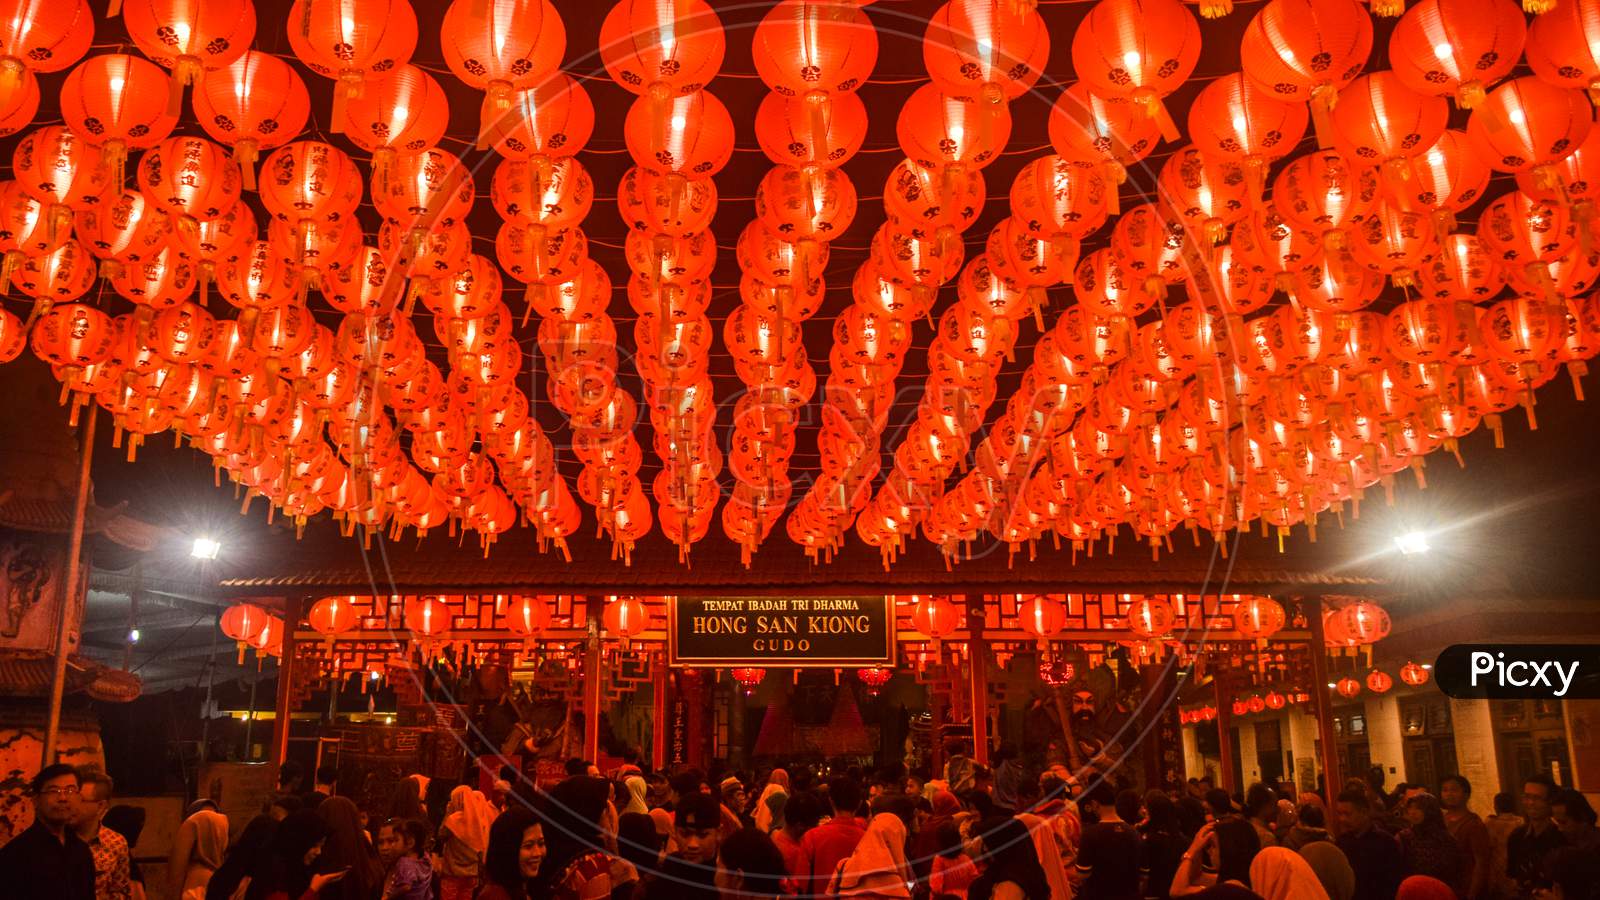 Rows of LAMPION at the Gudo Jombang temple during a celebration event in September 2019